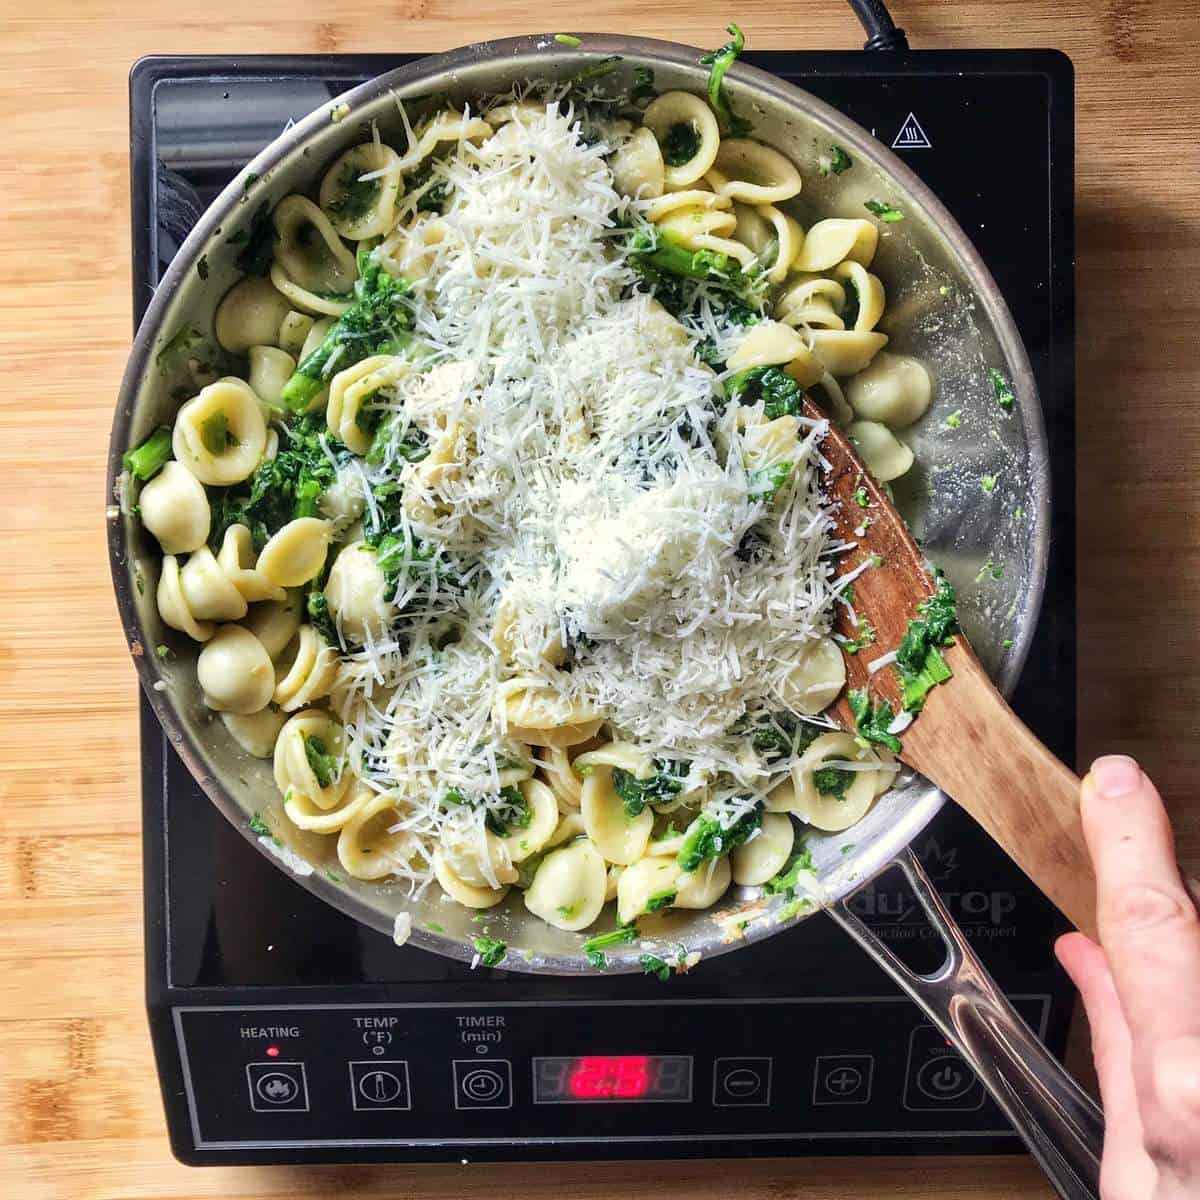 Cheese being incorporated with the broccoli rabe pasta.